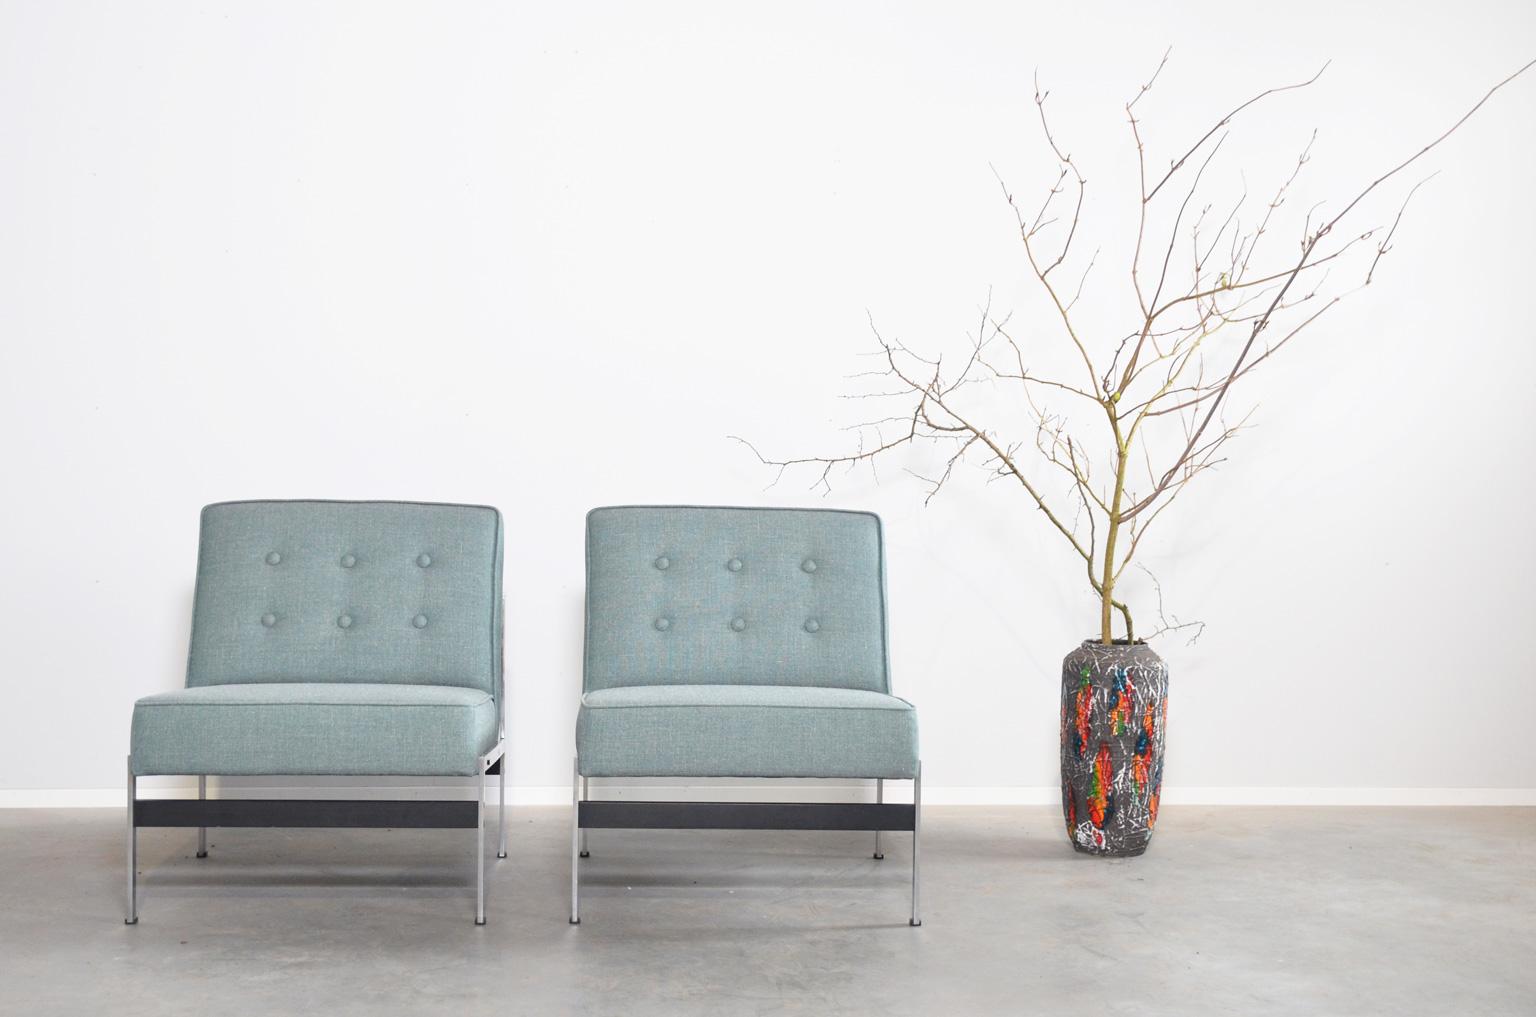 Midcentury armchairs from the 020 series by Dutch designer Kho Liang Ie for Artifort. The design of the chairs is simple and the construction of metal and wood is clearly visible. Both chairs have new seating’s and have a new green/blue upholstery